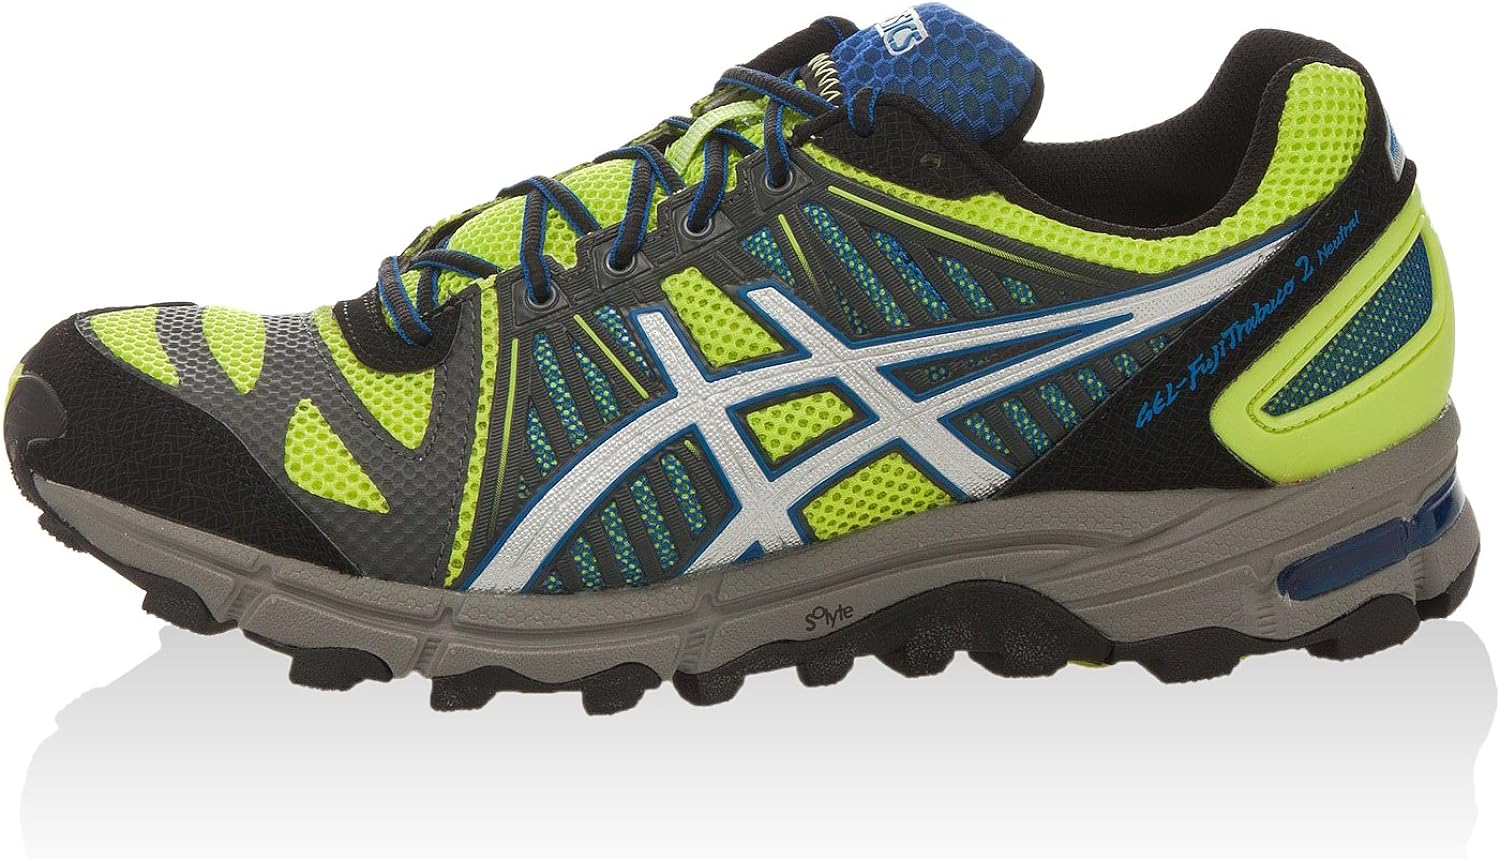 Looking to Buy The Asics Gel Nimus Mens Running Shoe. Find The Perfect Fit in 4 Steps